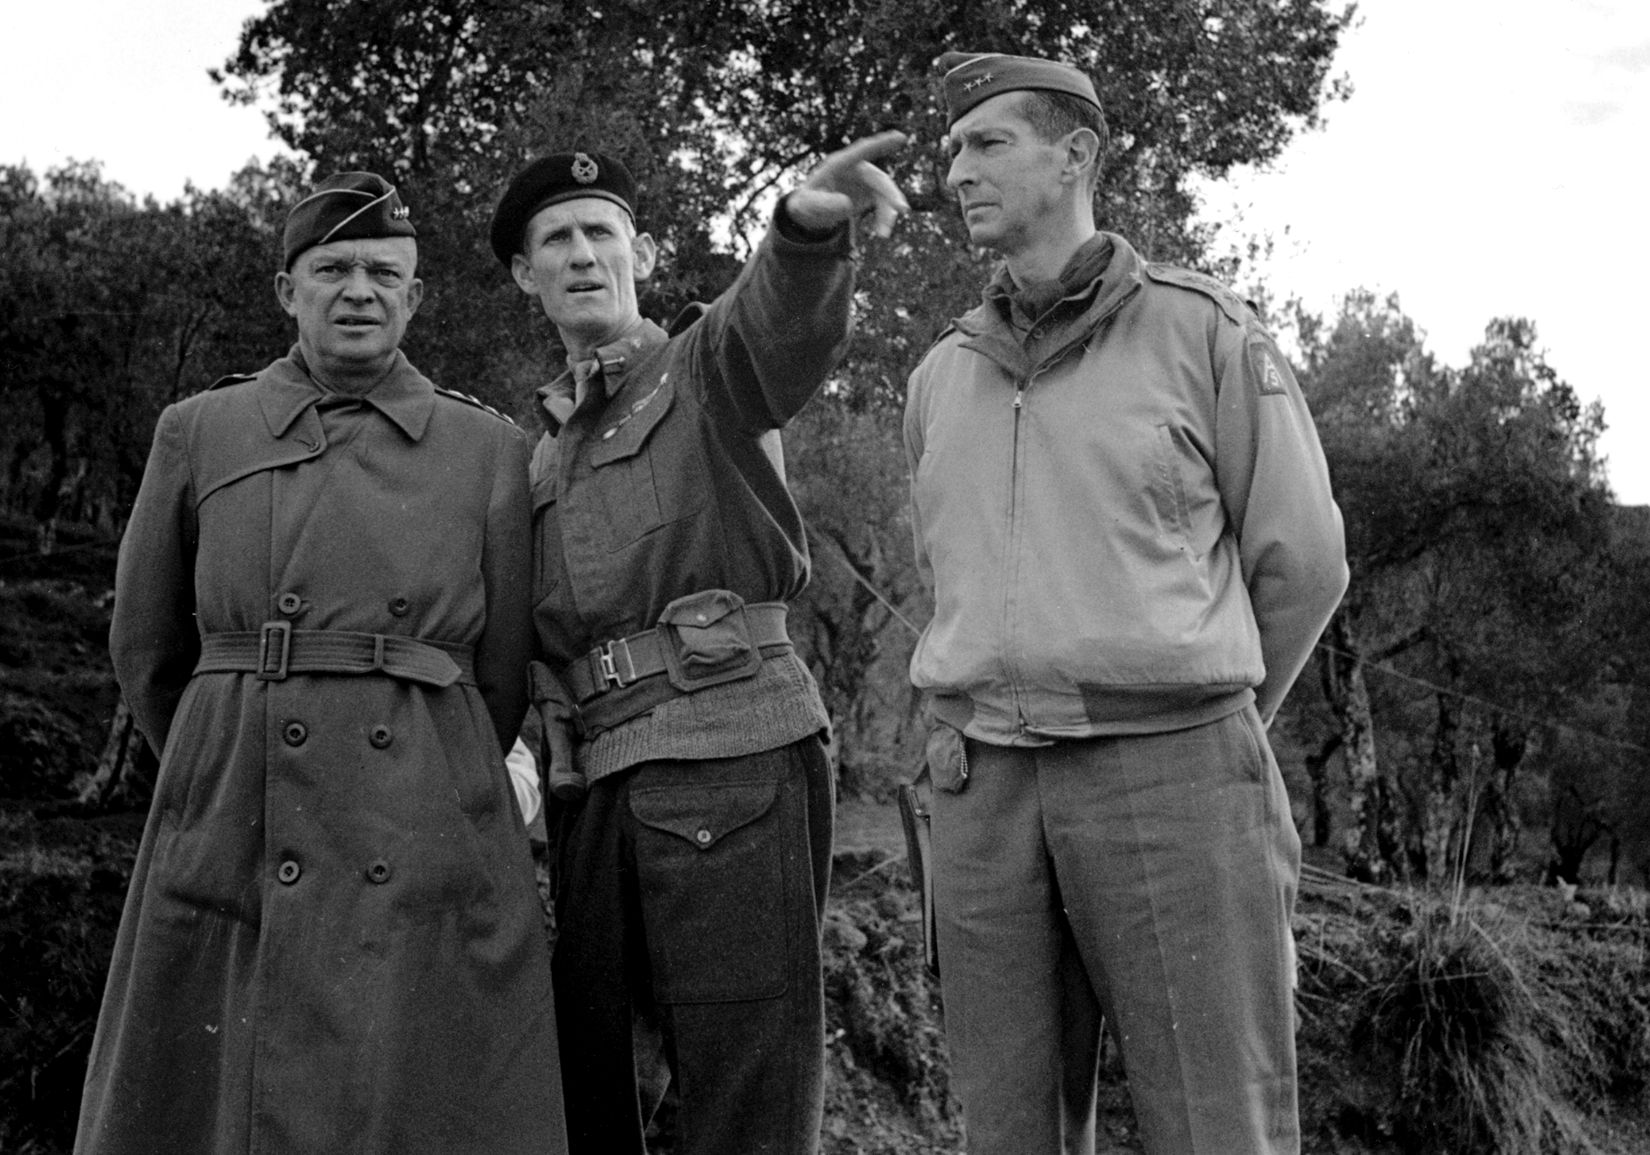 Lieutenant General Sir Richard McCreery (center), commander of the British X Corps, gestures during conversation with General Dwight D. Eisenhower (left), supreme Allied commander in the Mediterranean Theater, and General Mark Clark (right), commander of the Allied Fifth Army, during a meeting at San Martino on December 23, 1943.